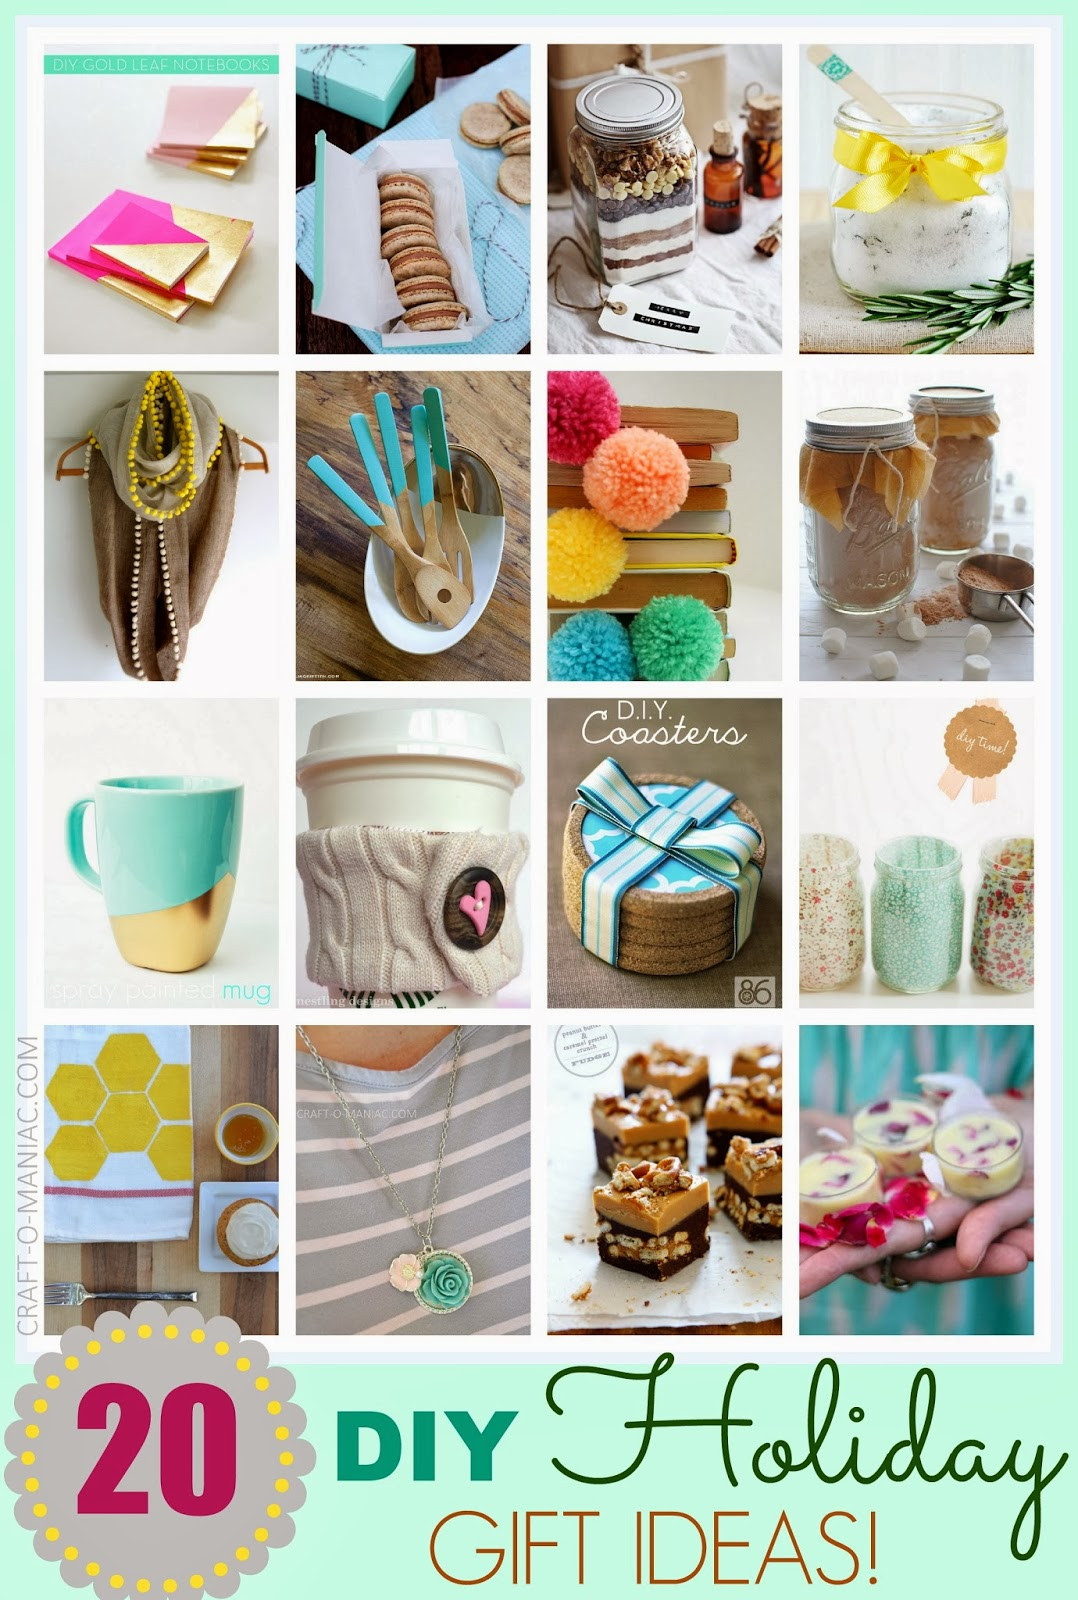 Holiday Crafts Gift Ideas
 Top 20 DIY Holiday Gift Ideas